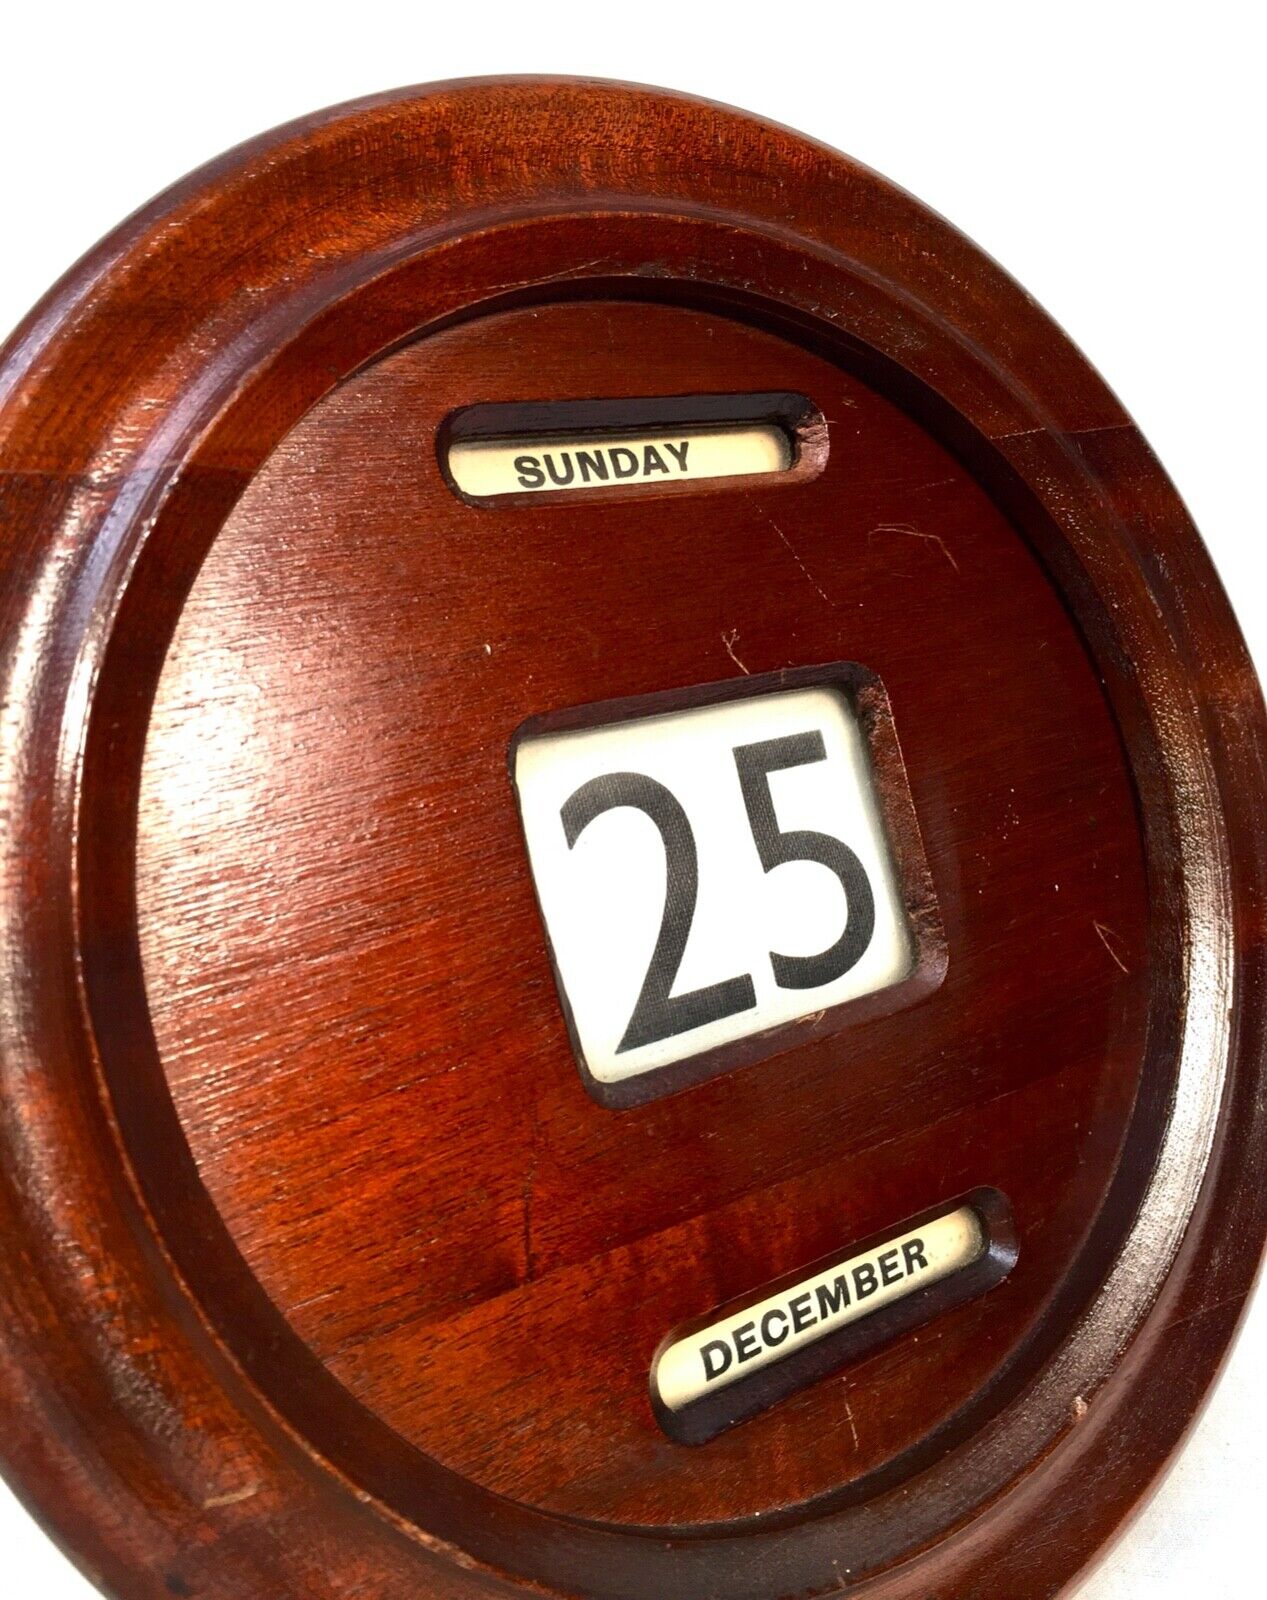 Antique Wooden Art Deco Perpetual Calendar / Wall Hanging / Stationery Equipment